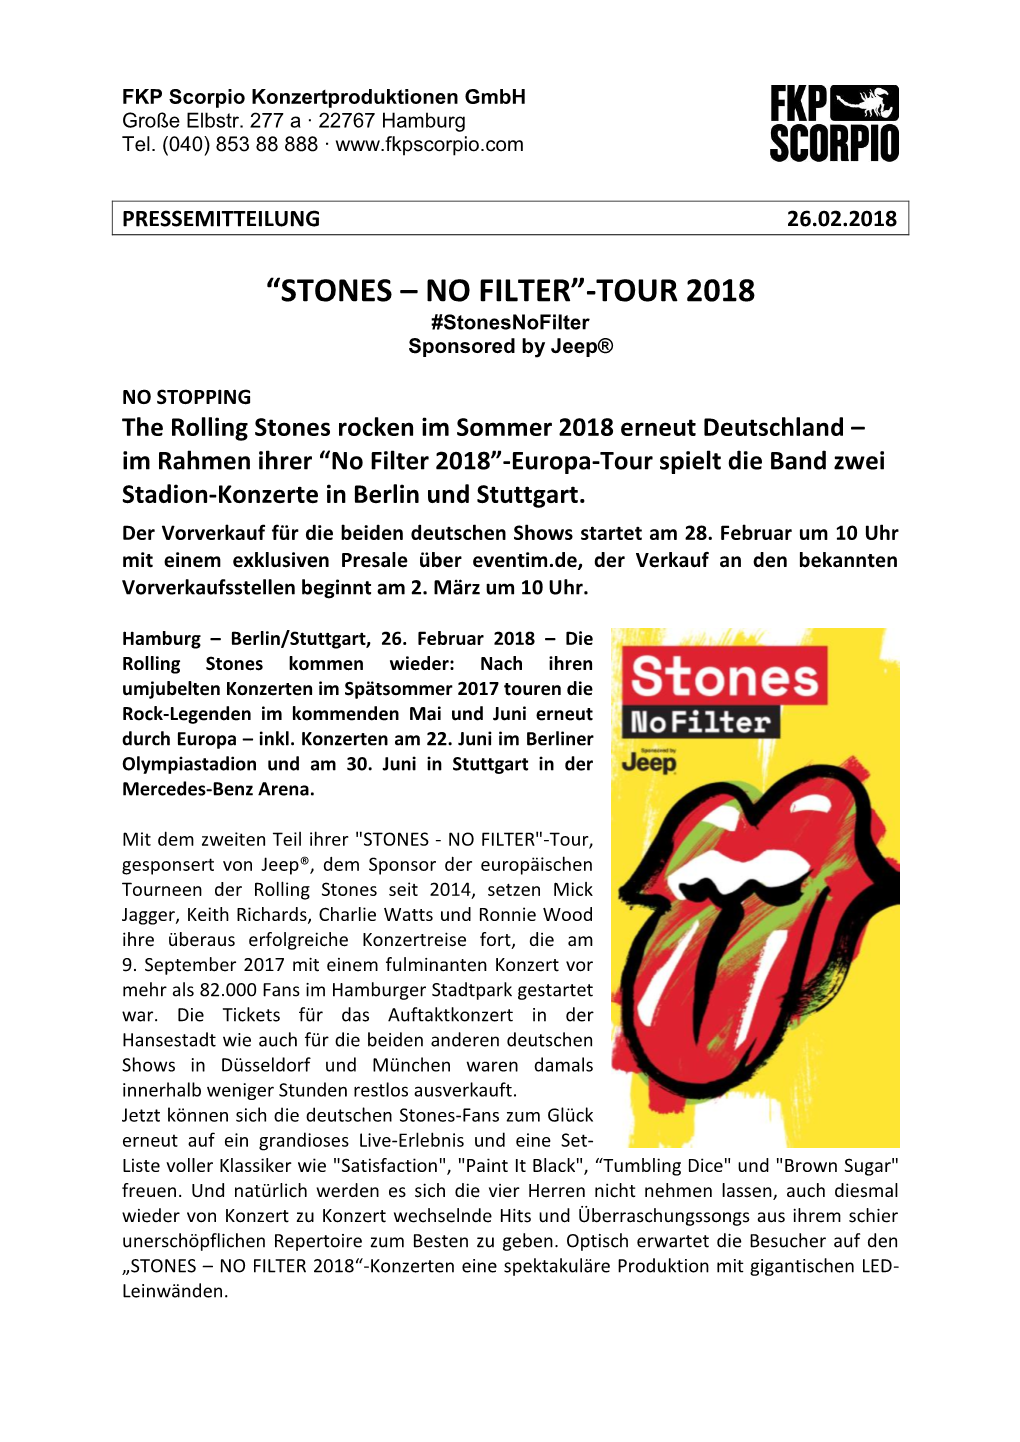 STONES – NO FILTER”-TOUR 2018 #Stonesnofilter Sponsored by Jeep®